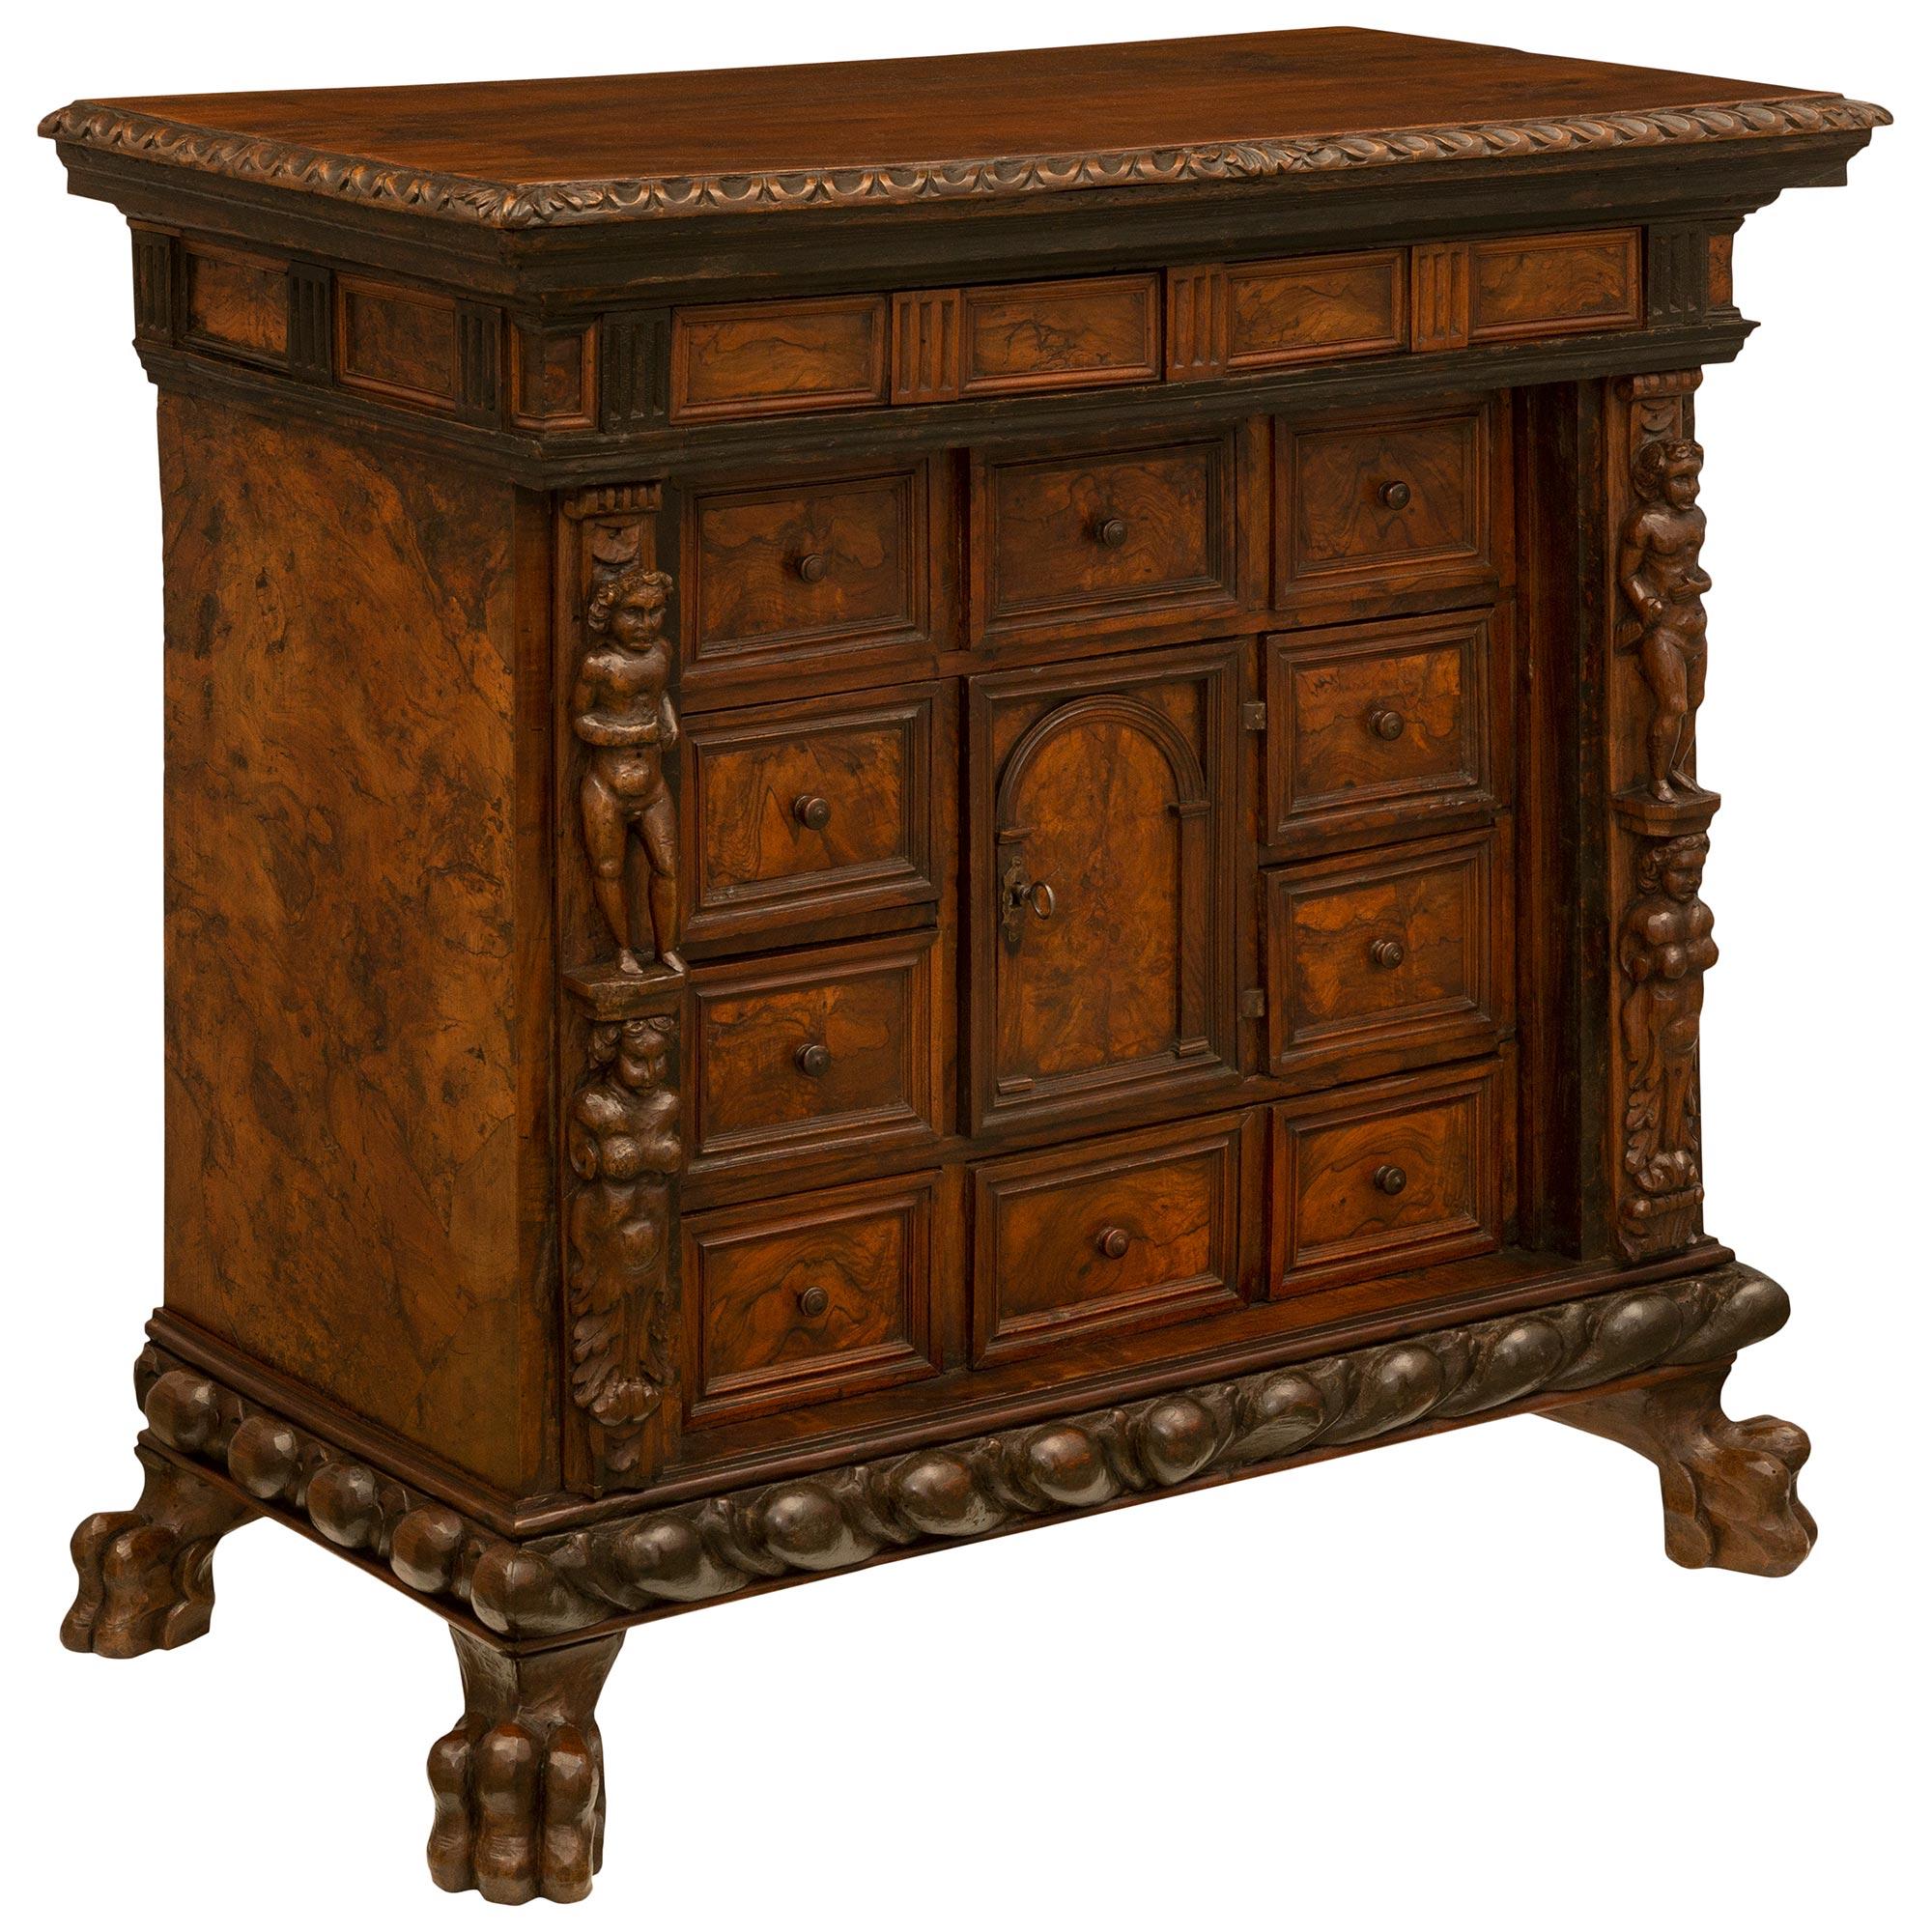 Italian 17th Century Baroque Period Walnut and Burl Walnut Cabinet In Good Condition For Sale In West Palm Beach, FL